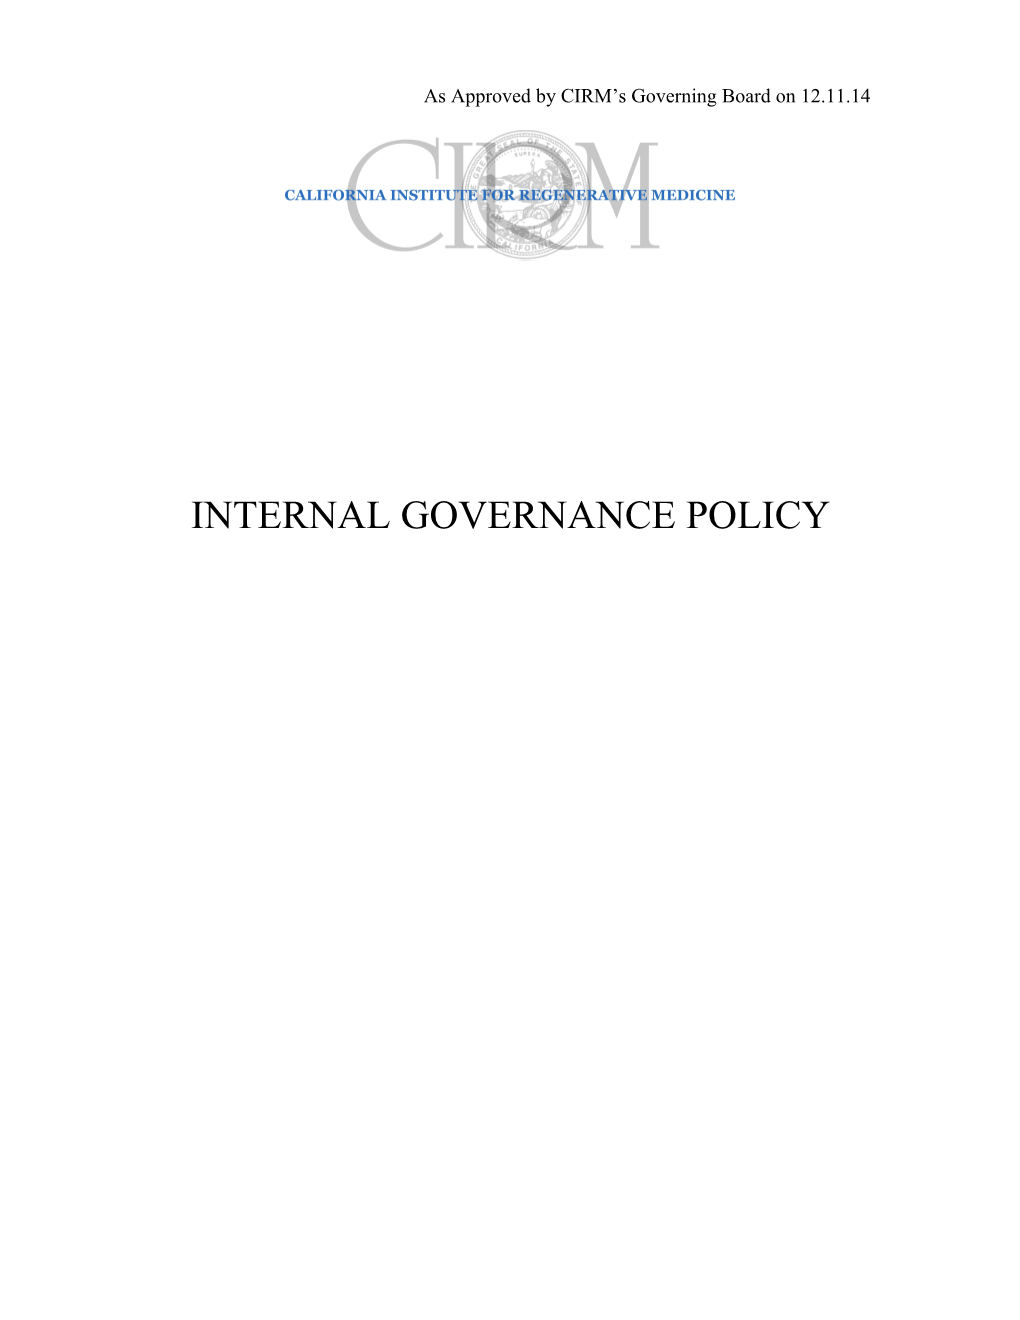 Internal Governance Policy 12.11.14 (Approved by Board) (00240526)